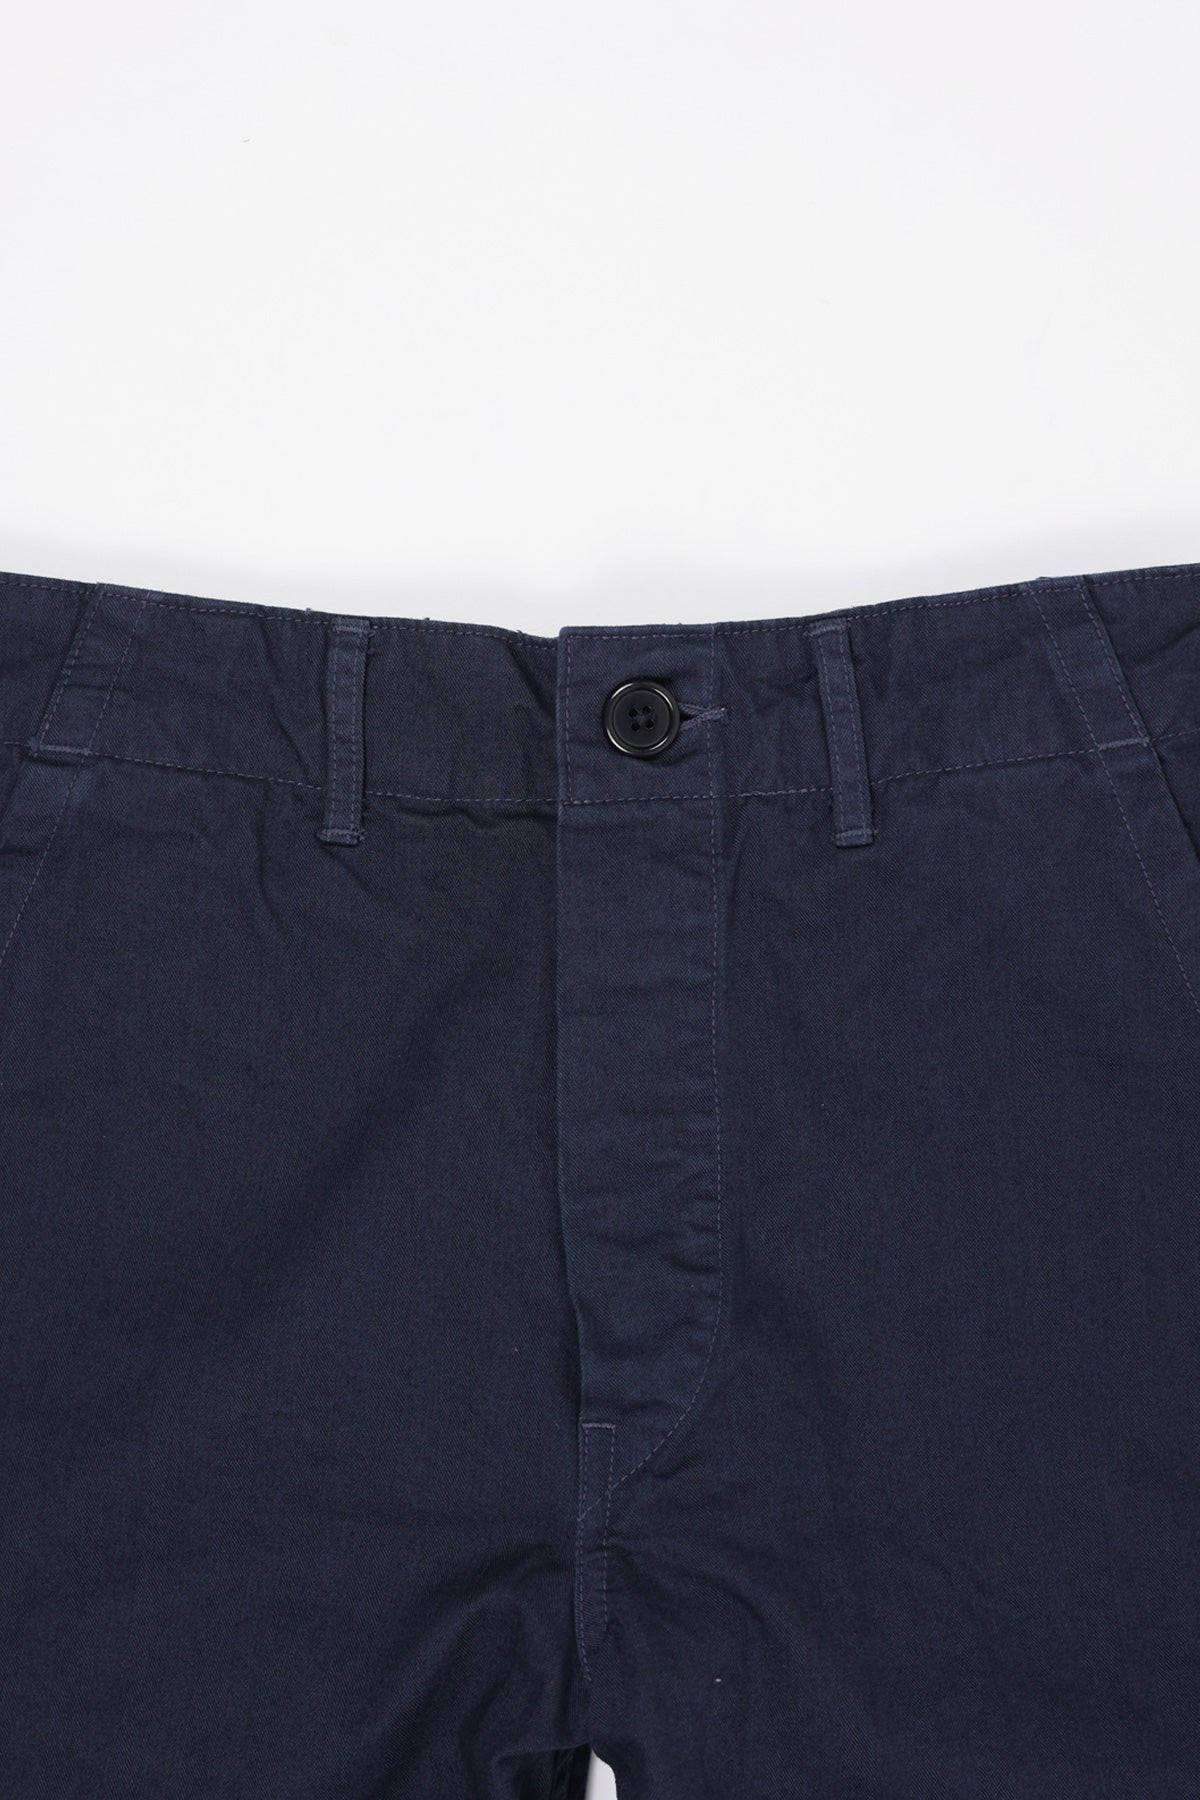 orSlow French Work Pants | Navy | Canoe Club